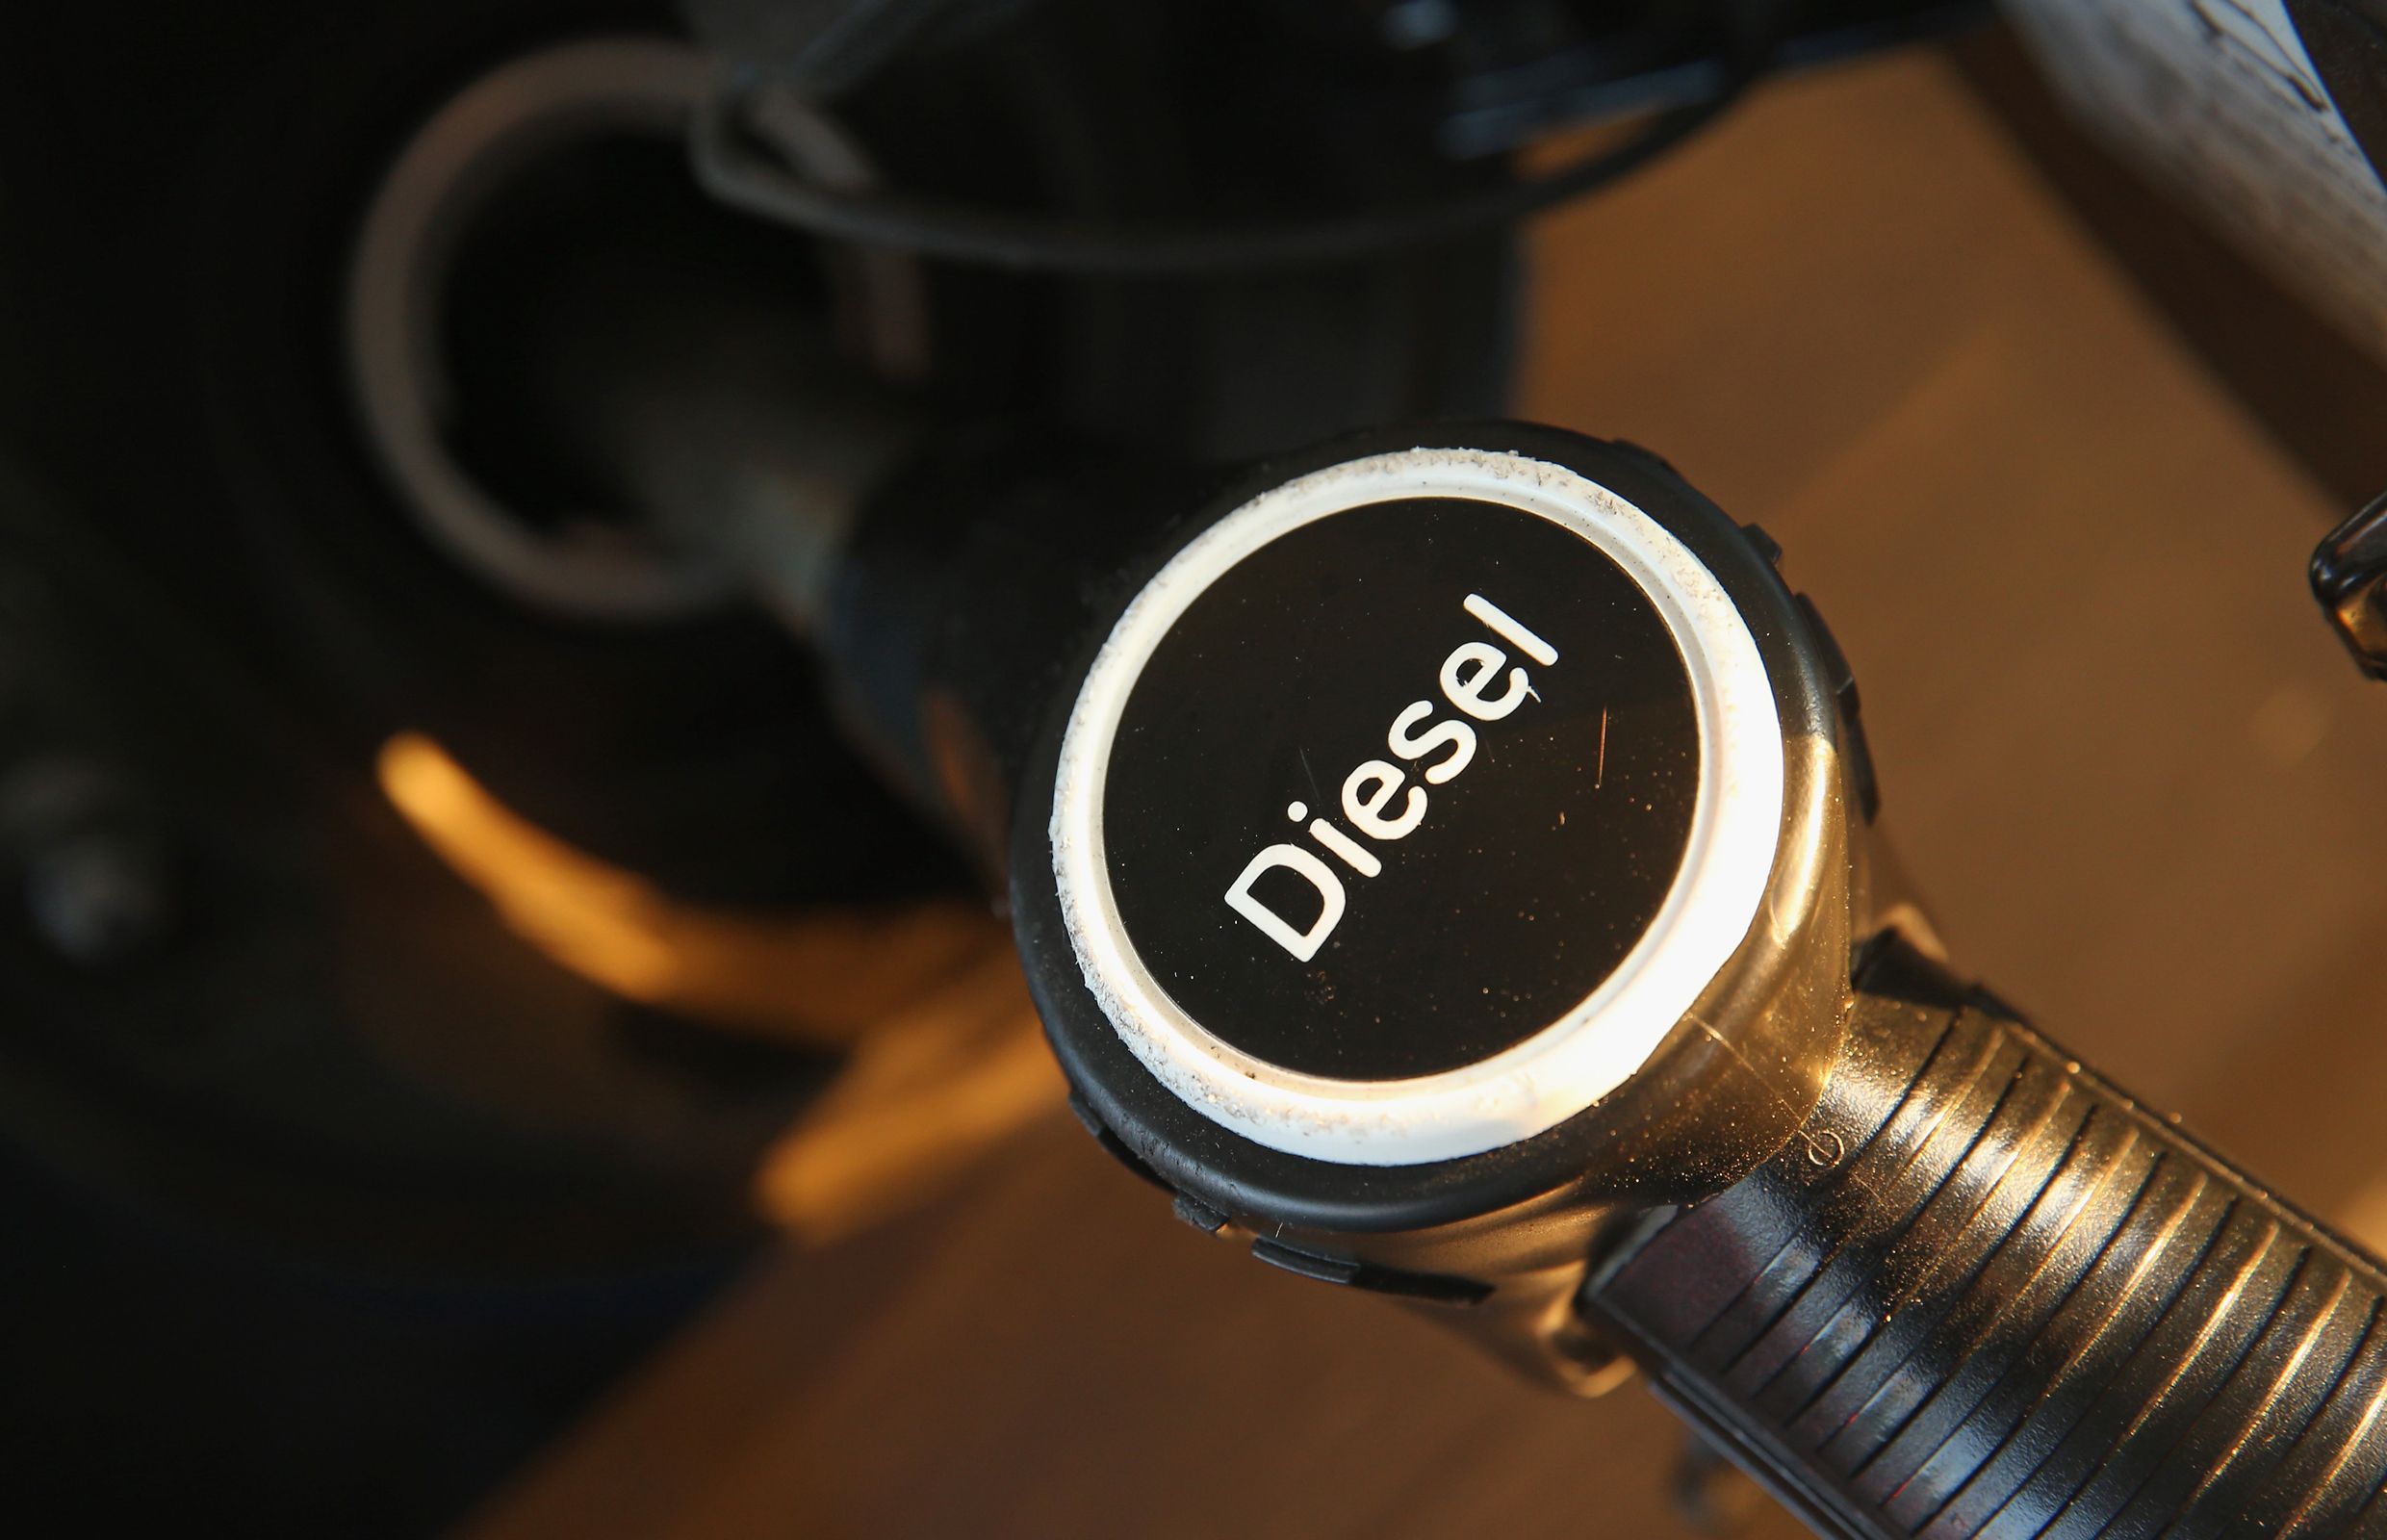 Diesel engines are more trouble than they're worth